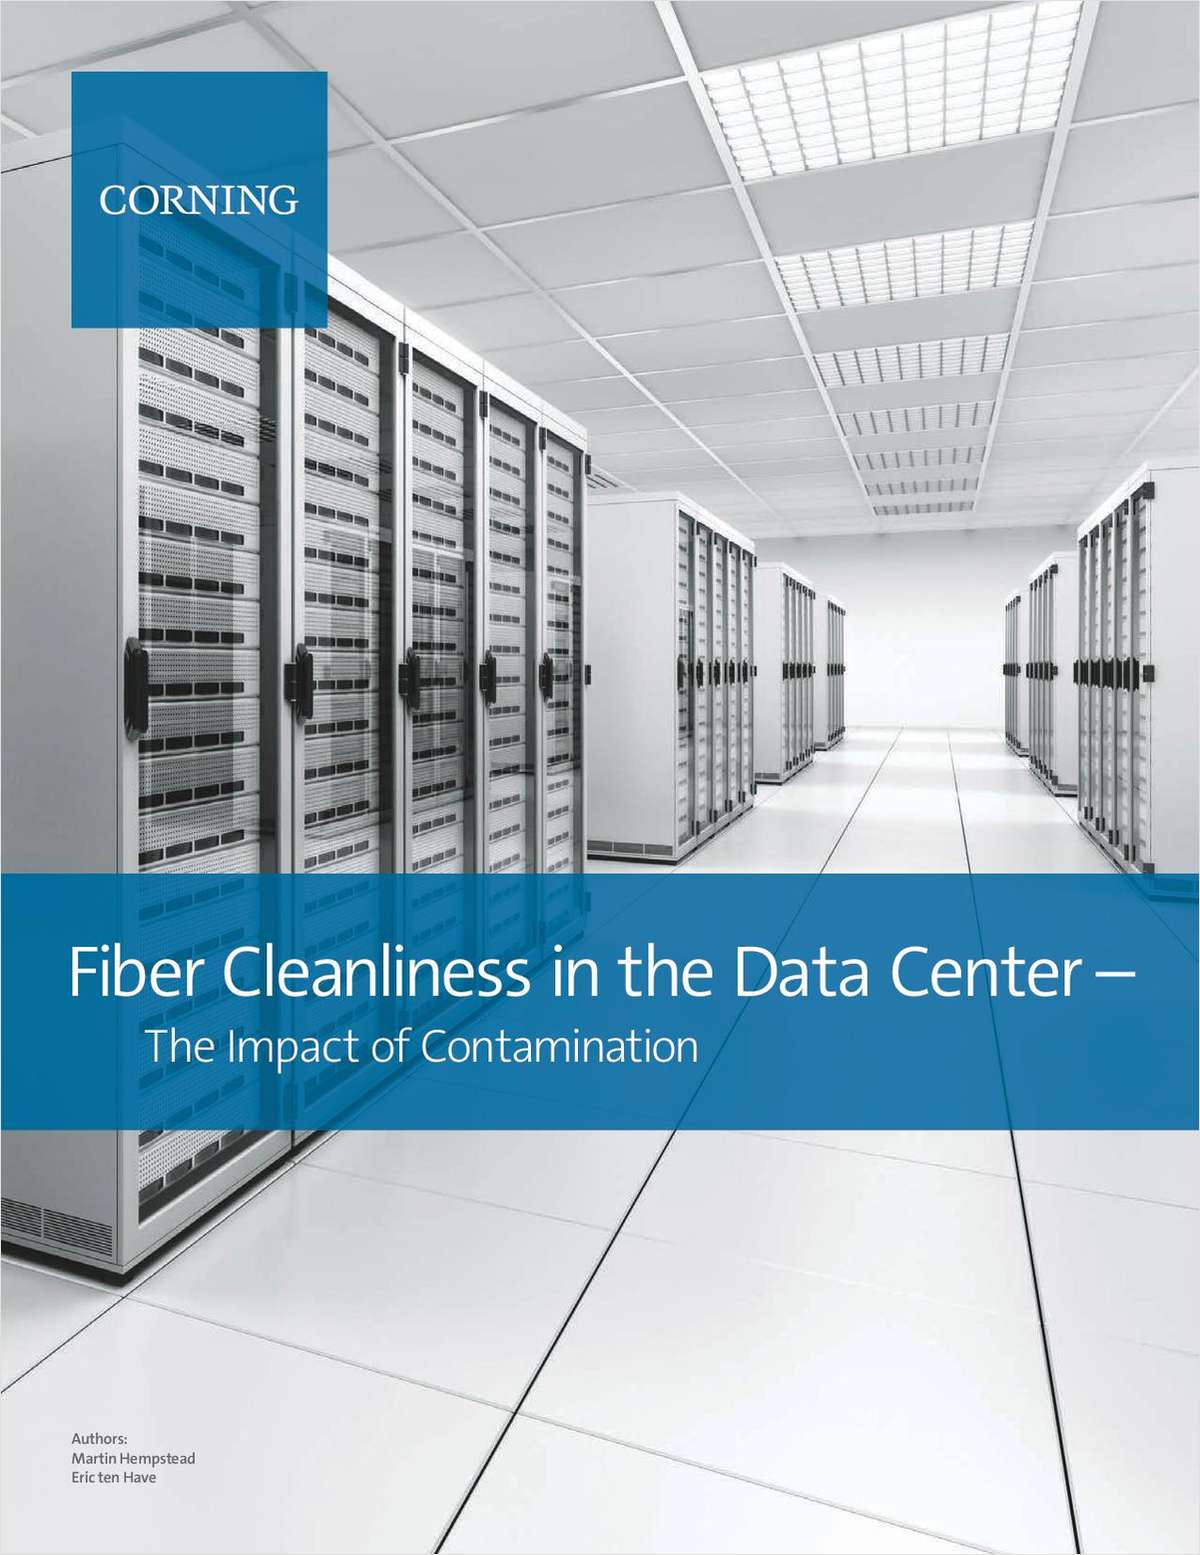 Fiber Cleanliness in the Data Center -- The Impact of Contamination